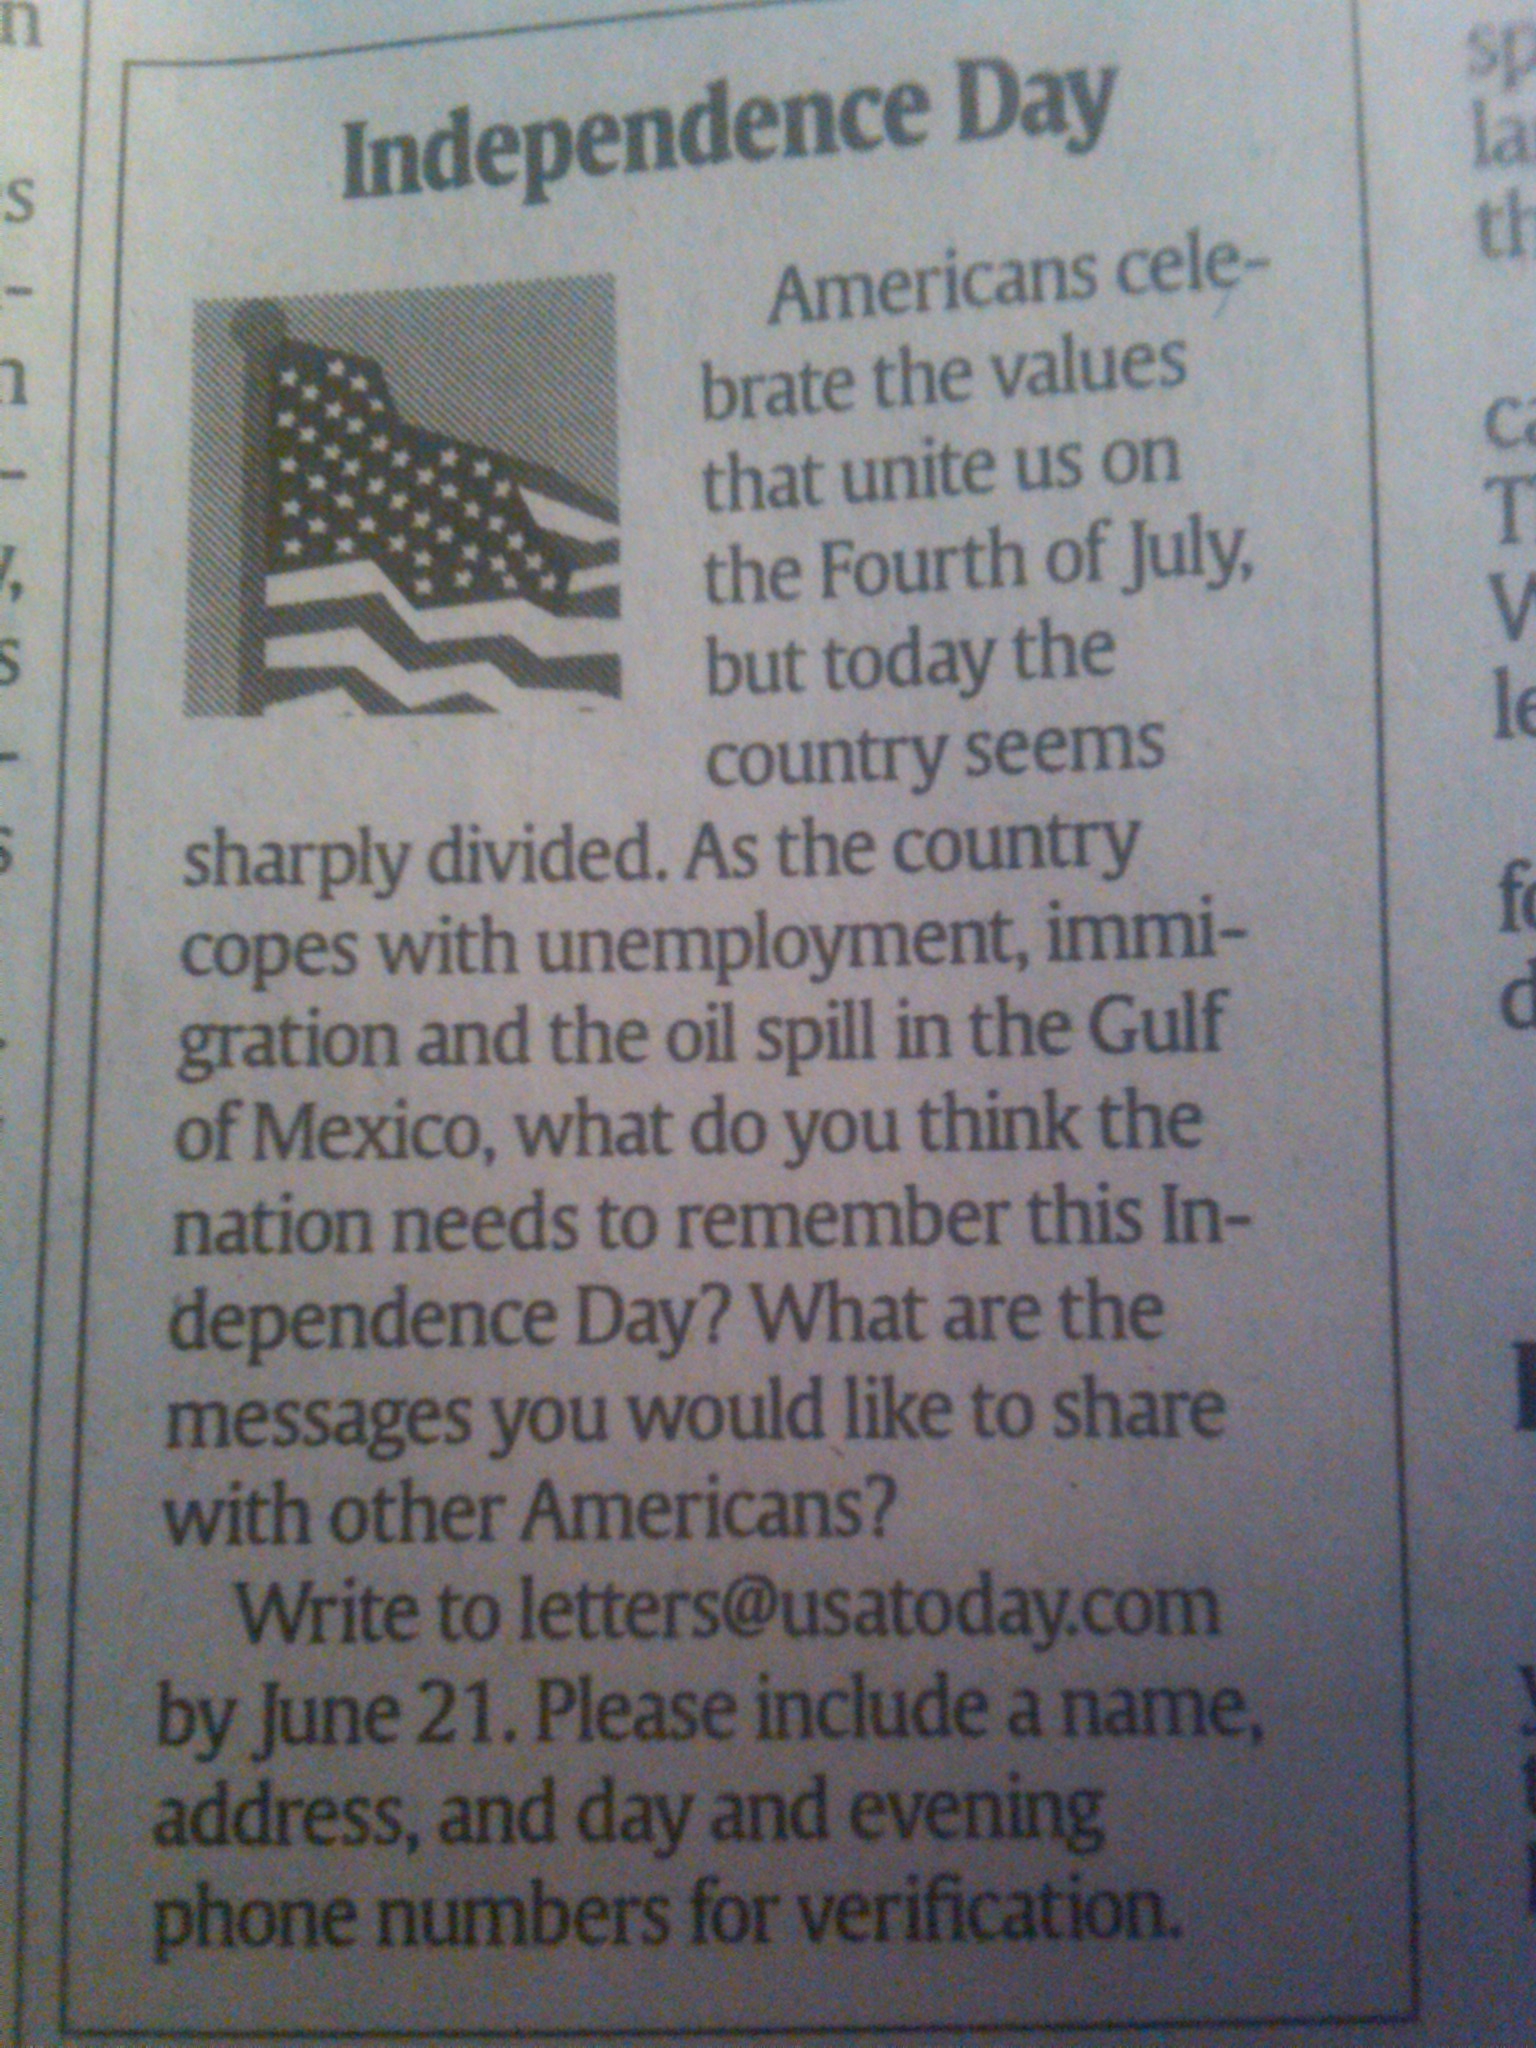 What Is The Meaning of Independence Day? Tell USA Today Your Thoughts